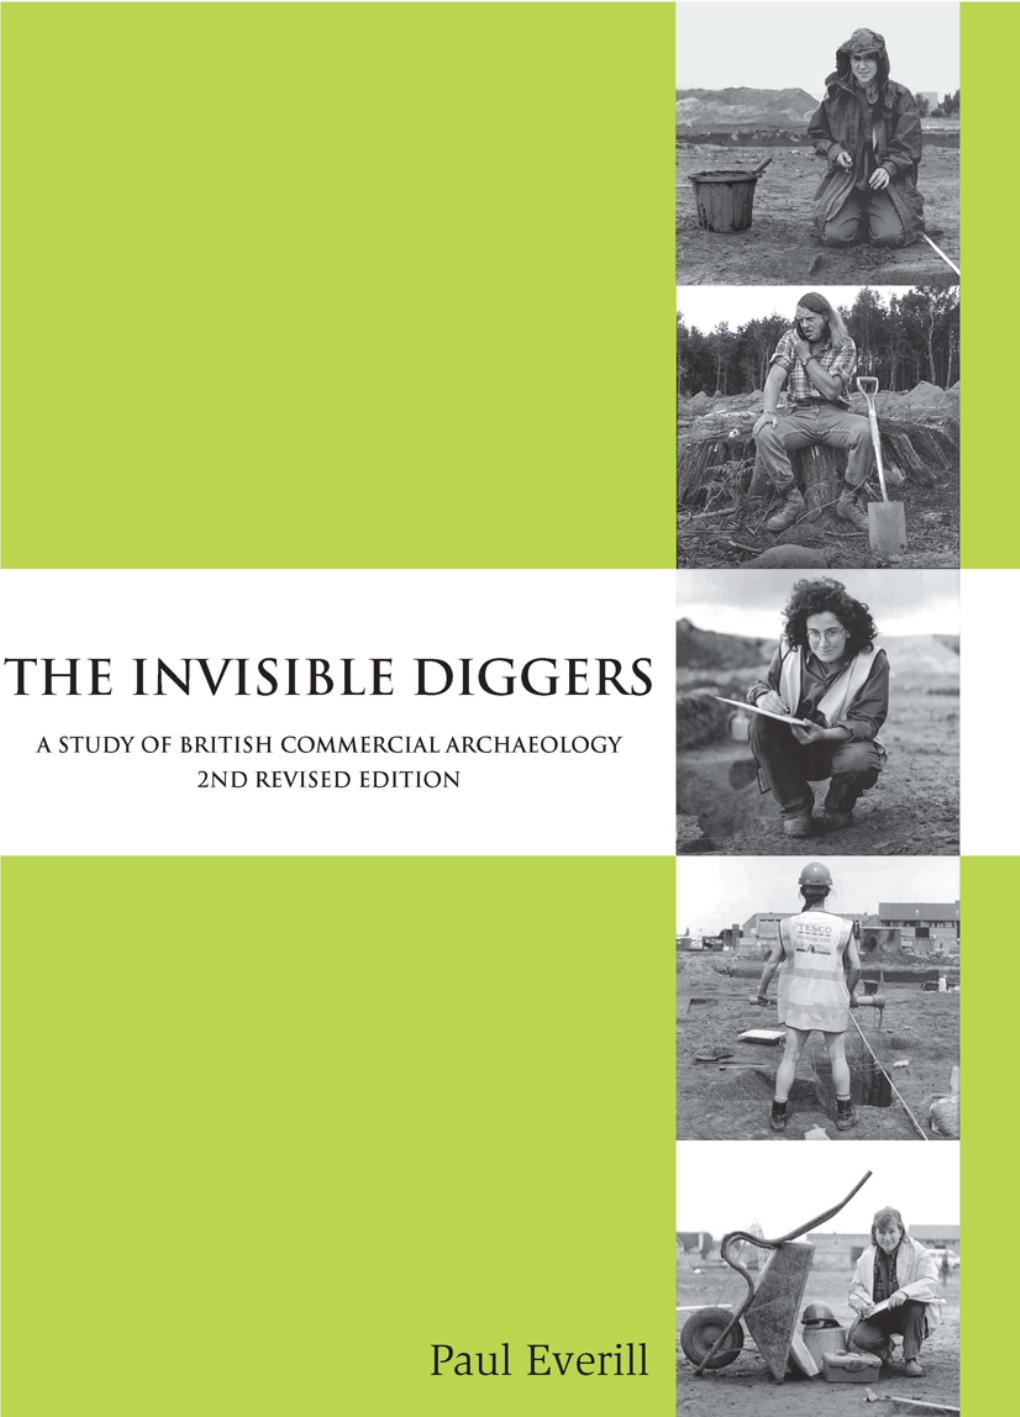 The Invisible Diggers: a Study of British Commercial Archaeology